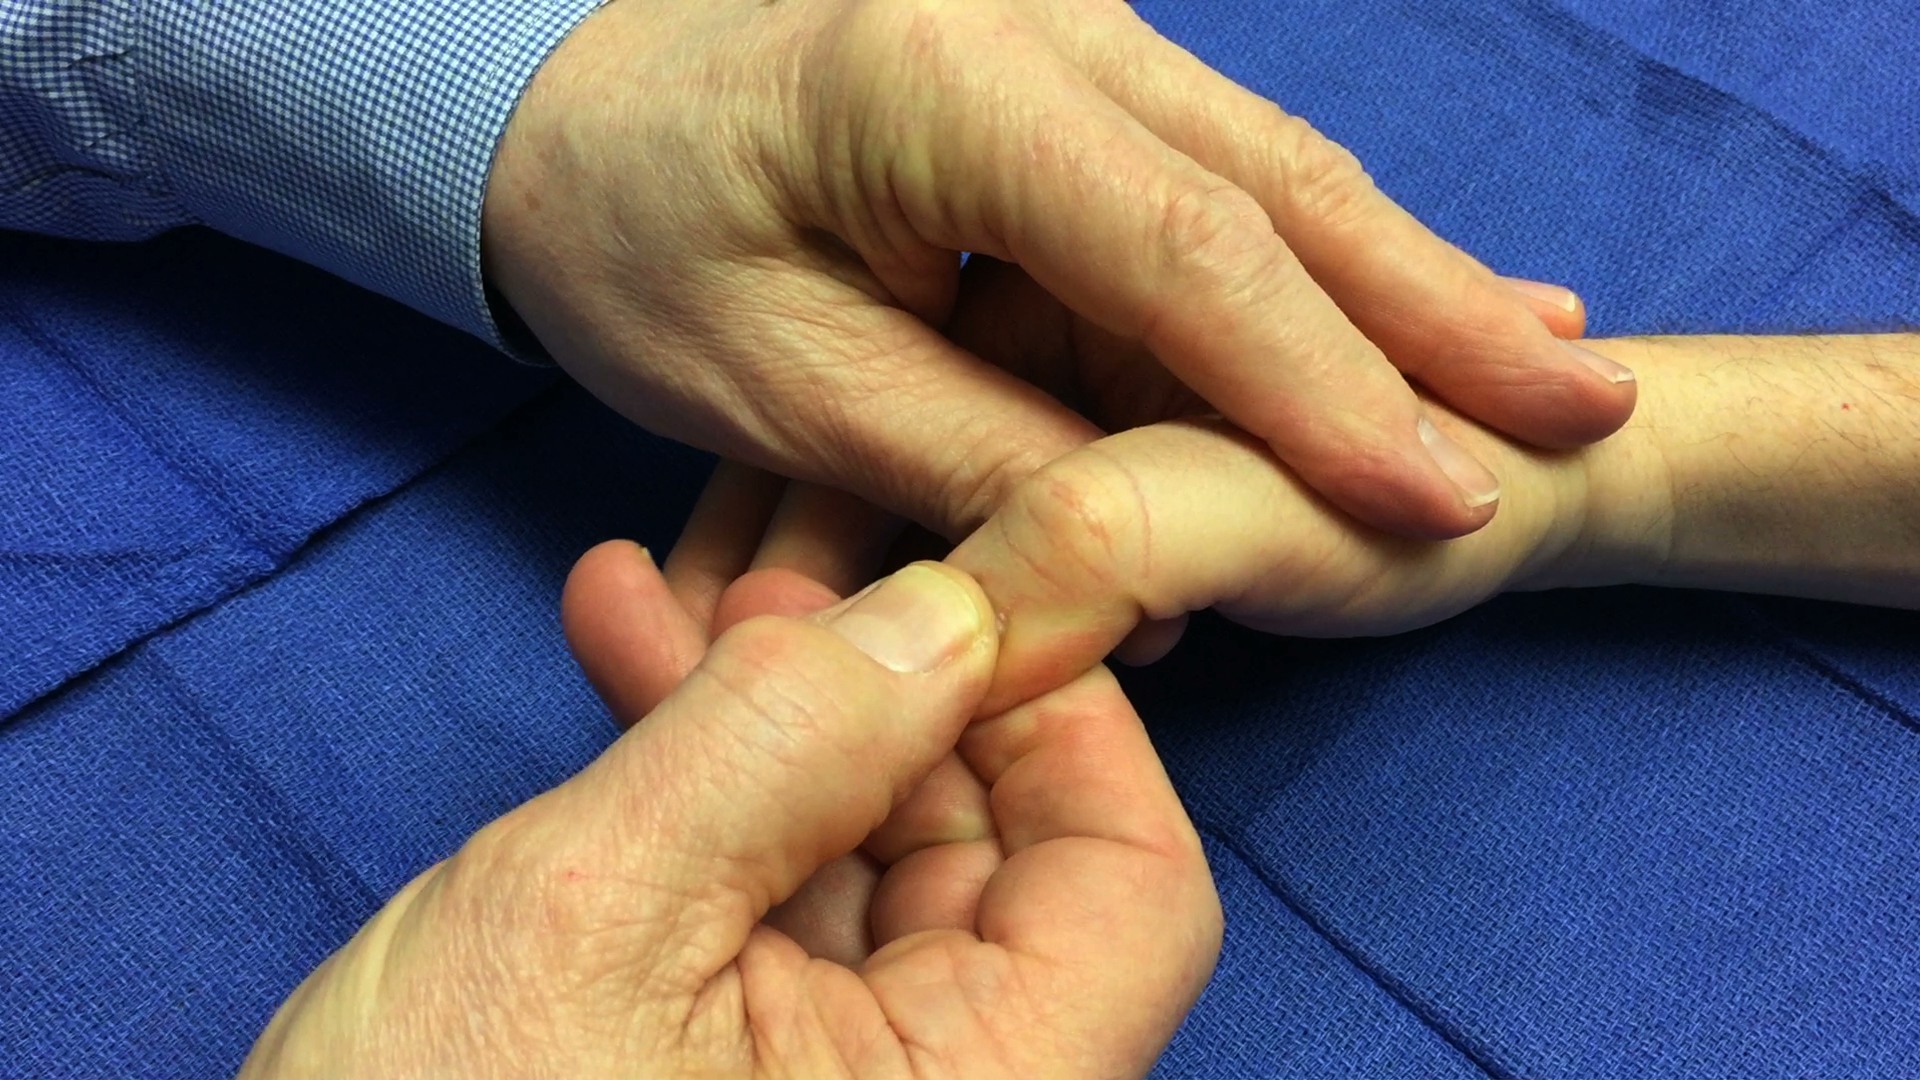 To Assess capillary refill first compress the nail bed,